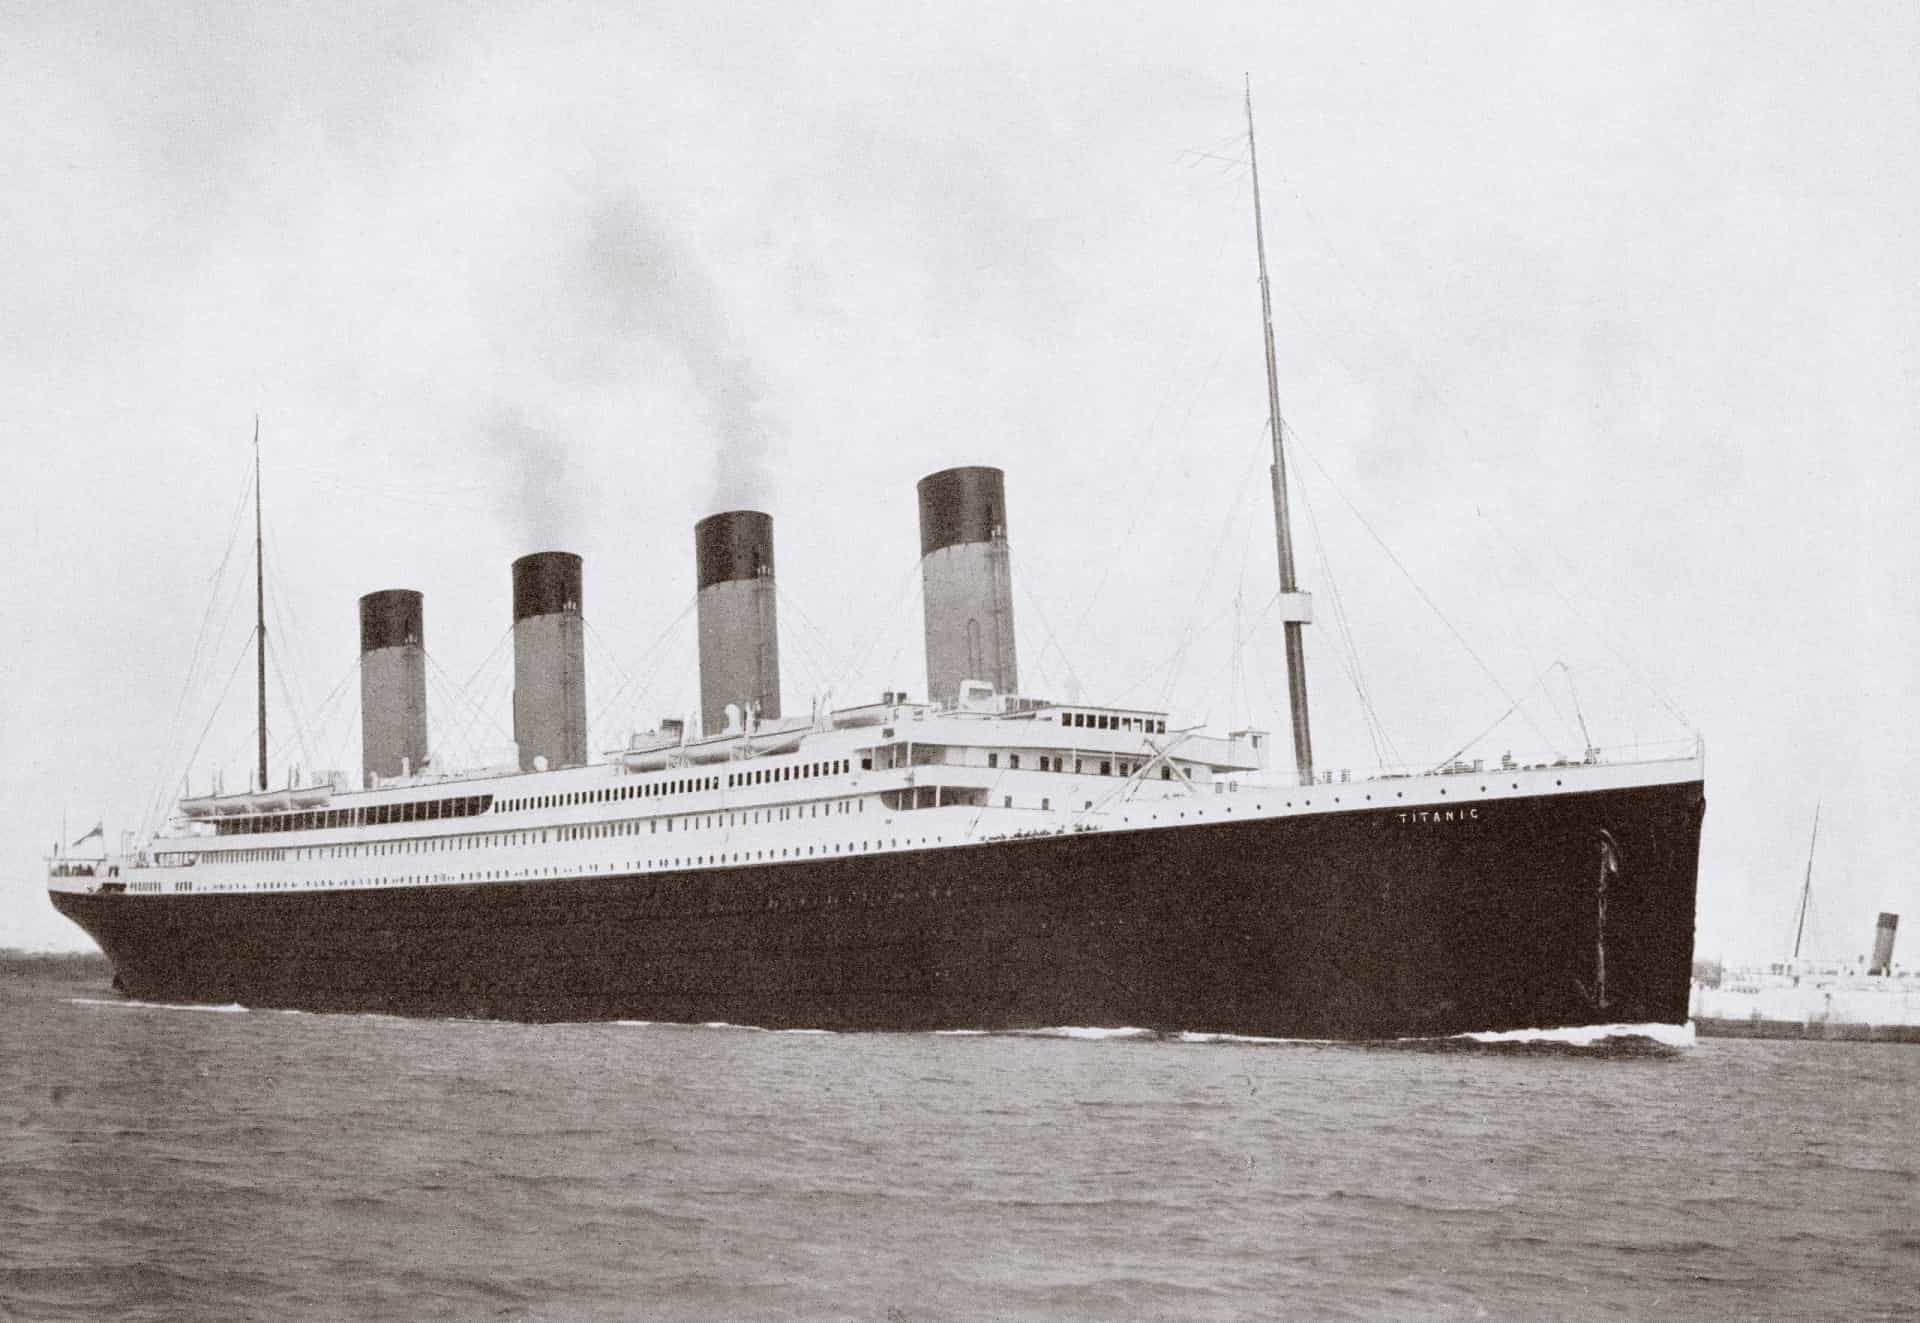 <p>On April 15, 1912, the British passenger liner RMS <em>Titanic</em> struck an iceberg and sank in the North Atlantic Ocean during her maiden voyage from Southampton to New York City. More than 1,500 people died in the tragedy. Operated by White Star, the loss of the <em>Titanic</em> remains the deadliest peacetime sinking of a superliner or cruise ship.</p><p>You may also like:<a href="https://www.starsinsider.com/n/402983?utm_source=msn.com&utm_medium=display&utm_campaign=referral_description&utm_content=597926en-za"> Celebrities who follow their faith religiously</a></p>